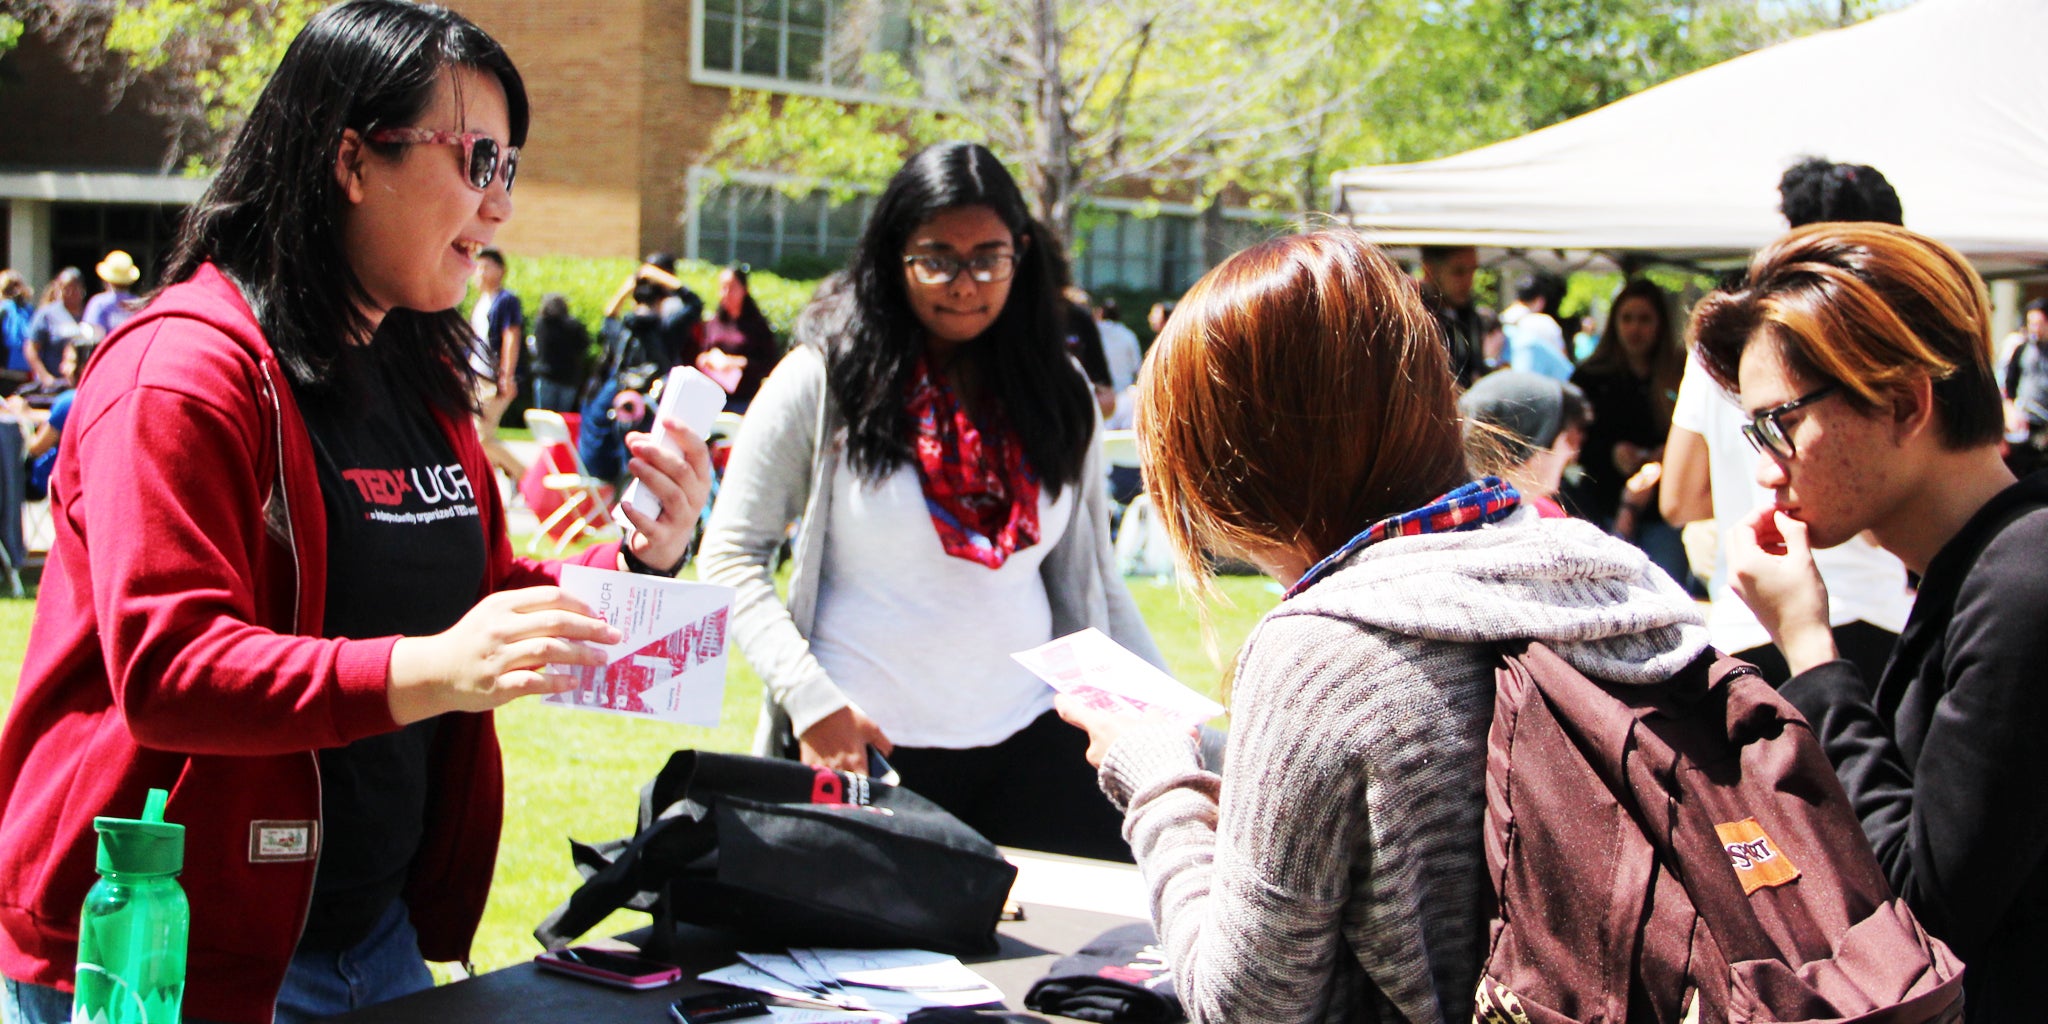 Students talk during a tabling event on campus.